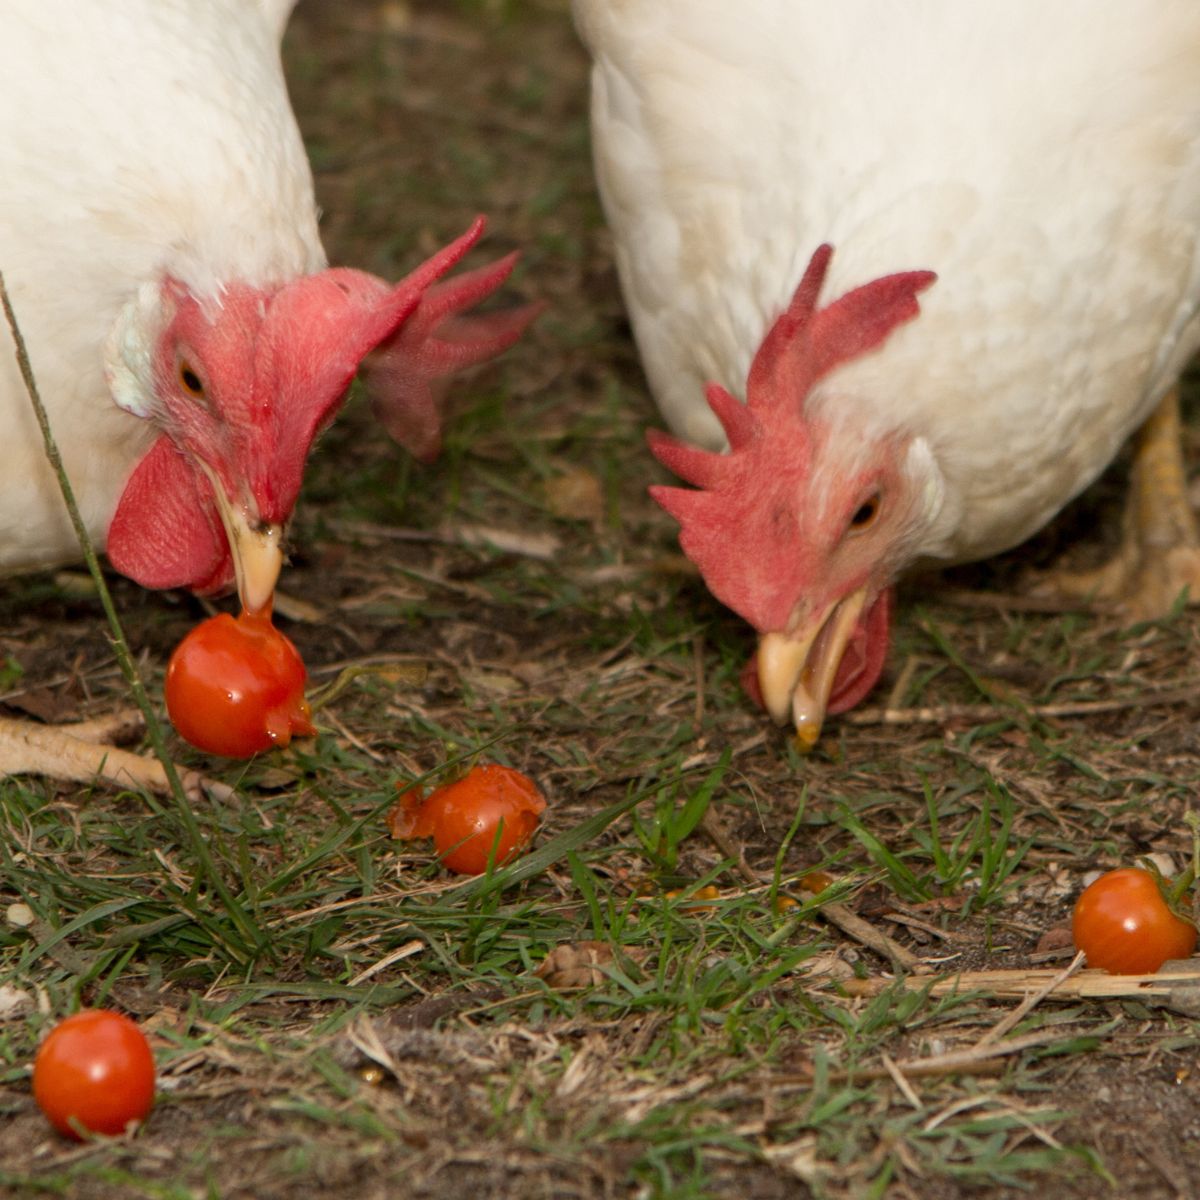 white chickens eating cherry tomatoes